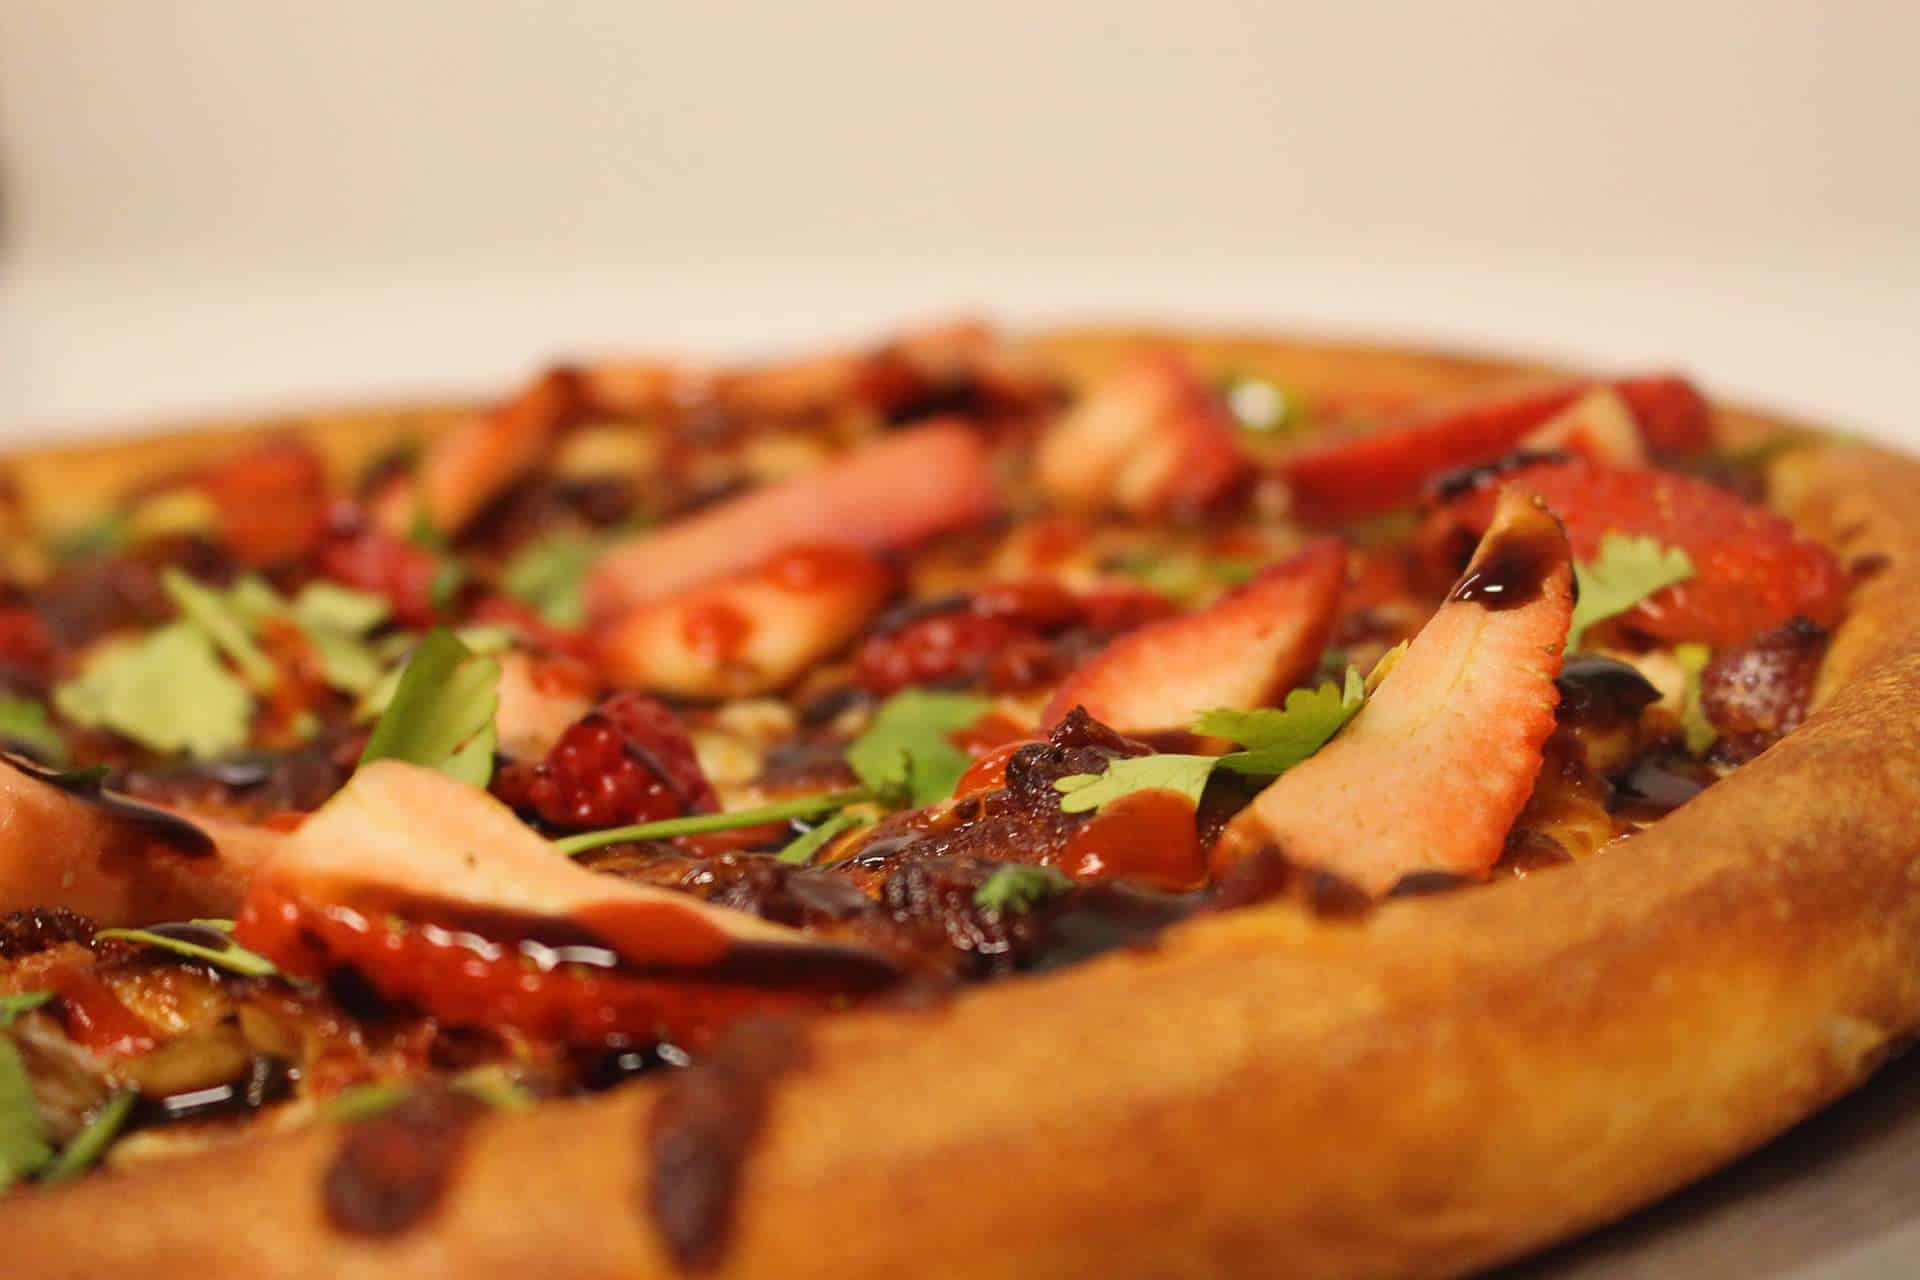 sloopy's award-winning paige's delight pizza